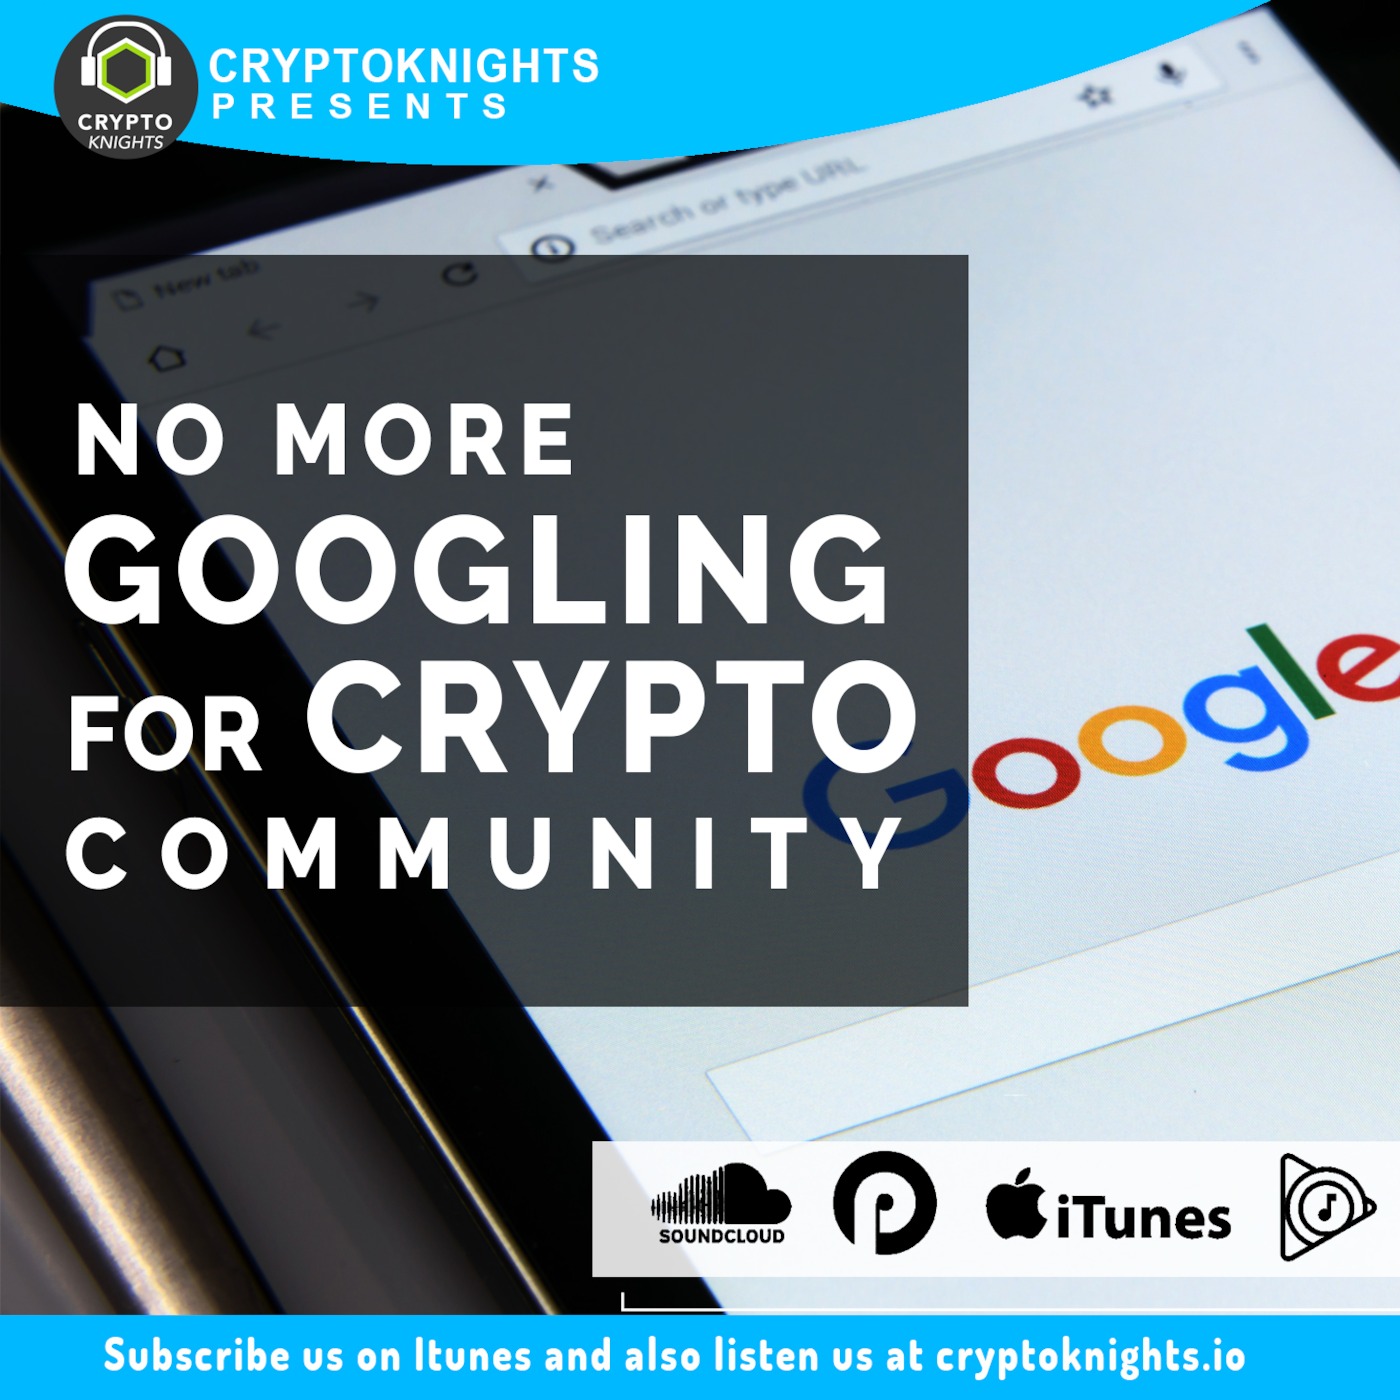 No More Googling for the Crypto Community